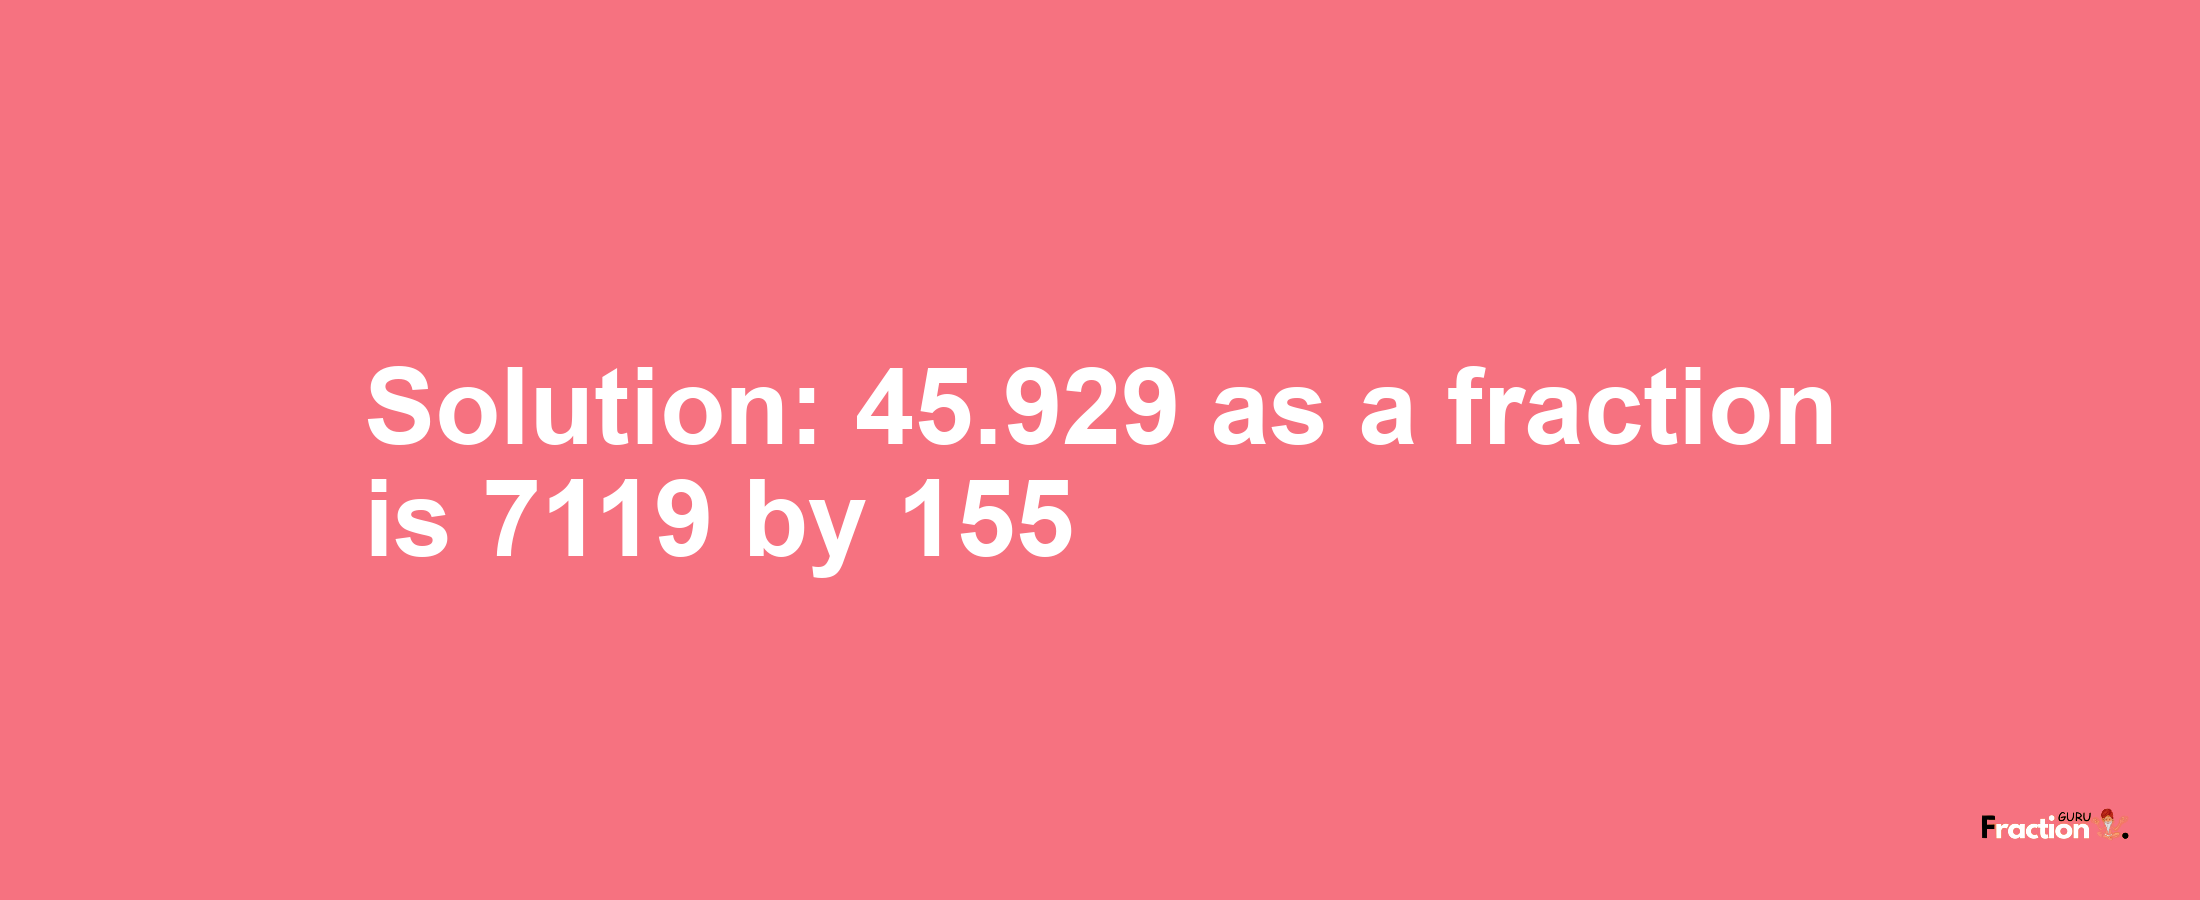 Solution:45.929 as a fraction is 7119/155